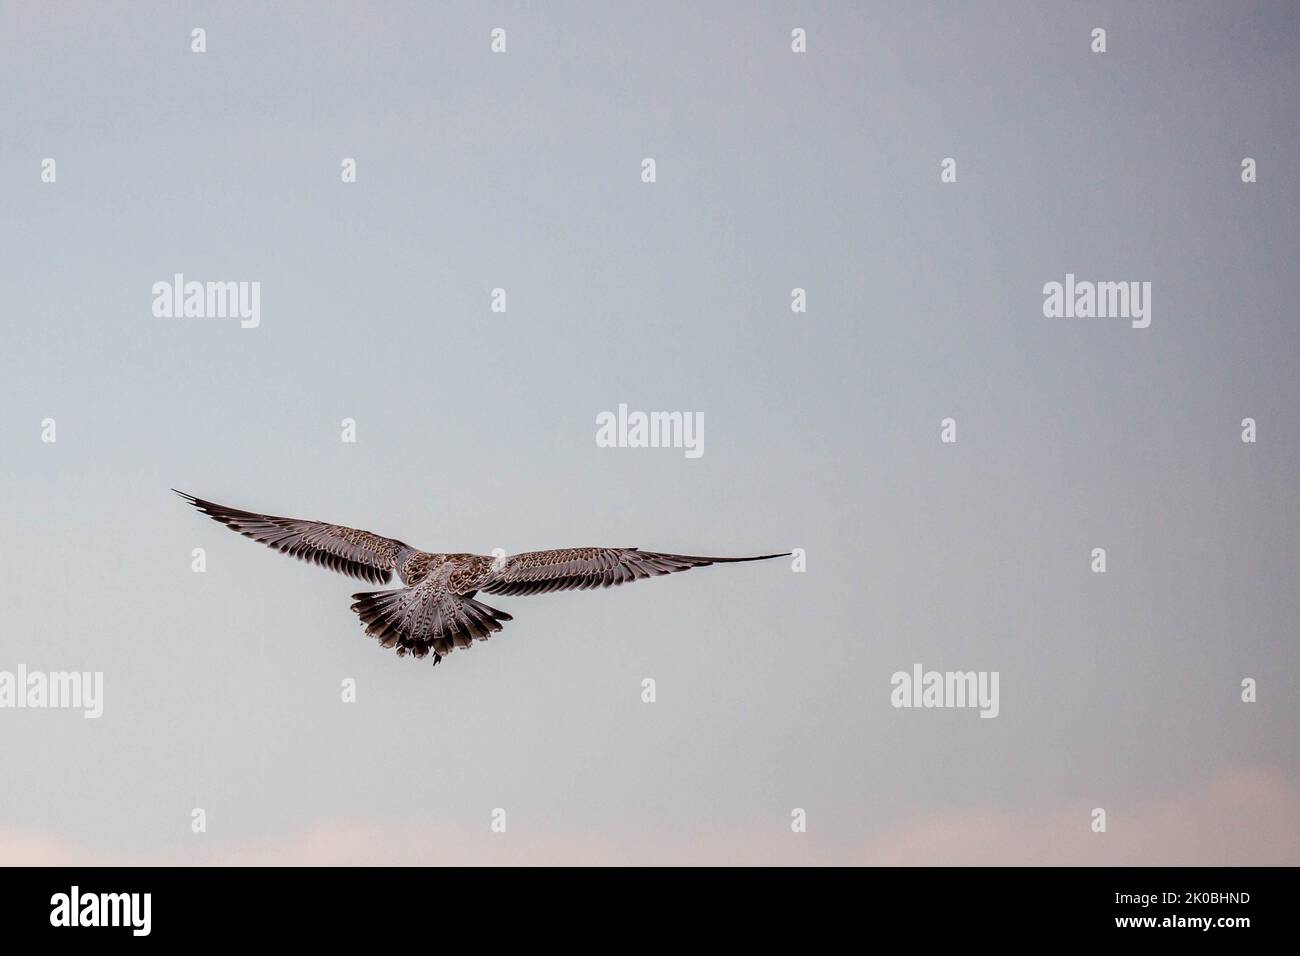 ring-billed gull (Larus delawarensis) immature flying in a light colored sky, horizontal Stock Photo